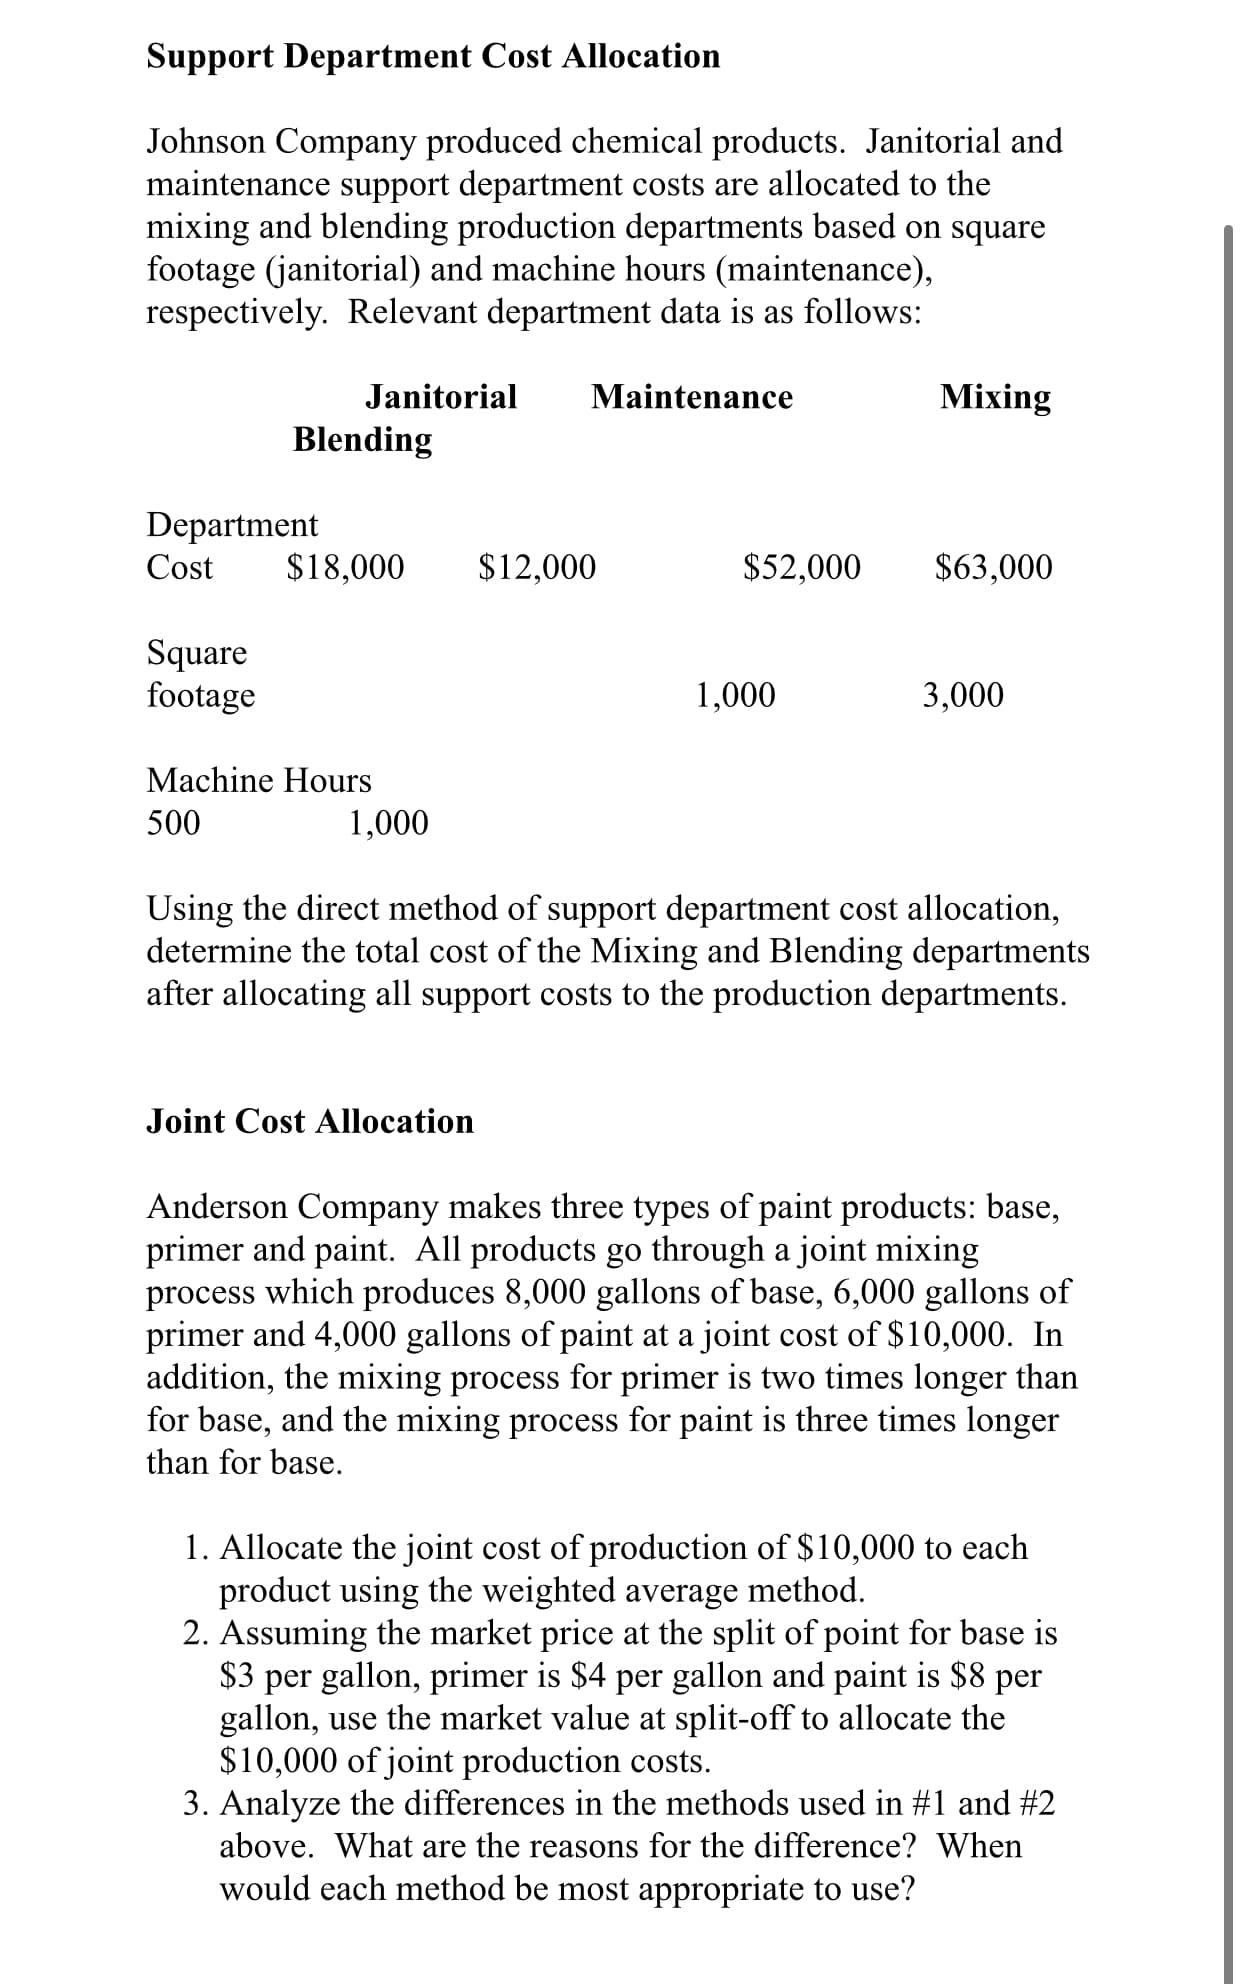 Support Department Cost Allocation
Johnson Company produced chemical products. Janitorial and
maintenance support department costs are allocated to the
mixing and blending production departments based on square
footage (janitorial) and machine hours (maintenance),
respectively. Relevant department data is as follows:
Janitorial
Maintenance
Mixing
Blending
Department
$18,000
Cost
$12,000
$52,000
$63,000
Square
footage
1,000
3,000
Machine Hours
500
1,000
Using the direct method of support department cost allocation,
determine the total cost of the Mixing and Blending departments
after allocating all support costs to the production departments.
Joint Cost Allocation
Anderson Company makes three types of paint products: base,
primer and paint. All products go through a joint mixing
process which produces 8,000 gallons of base, 6,000 gallons of
primer and 4,000 gallons of paint at a joint cost of $10,000. In
addition, the mixing process for primer is two times longer than
for base, and the mixing process for paint is three times longer
than for base.
1. Allocate the joint cost of production of $10,000 to each
product using the weighted average method.
2. Assuming the market price at the split of point for base is
$3 per gallon, primer is $4 per gallon and paint is $8 per
gallon, use the market value at split-off to allocate the
$10,000 of joint production costs.
3. Analyze the differences in the methods used in #1 and #2
above. What are the reasons for the difference? When
would each method be most appropriate to use?
